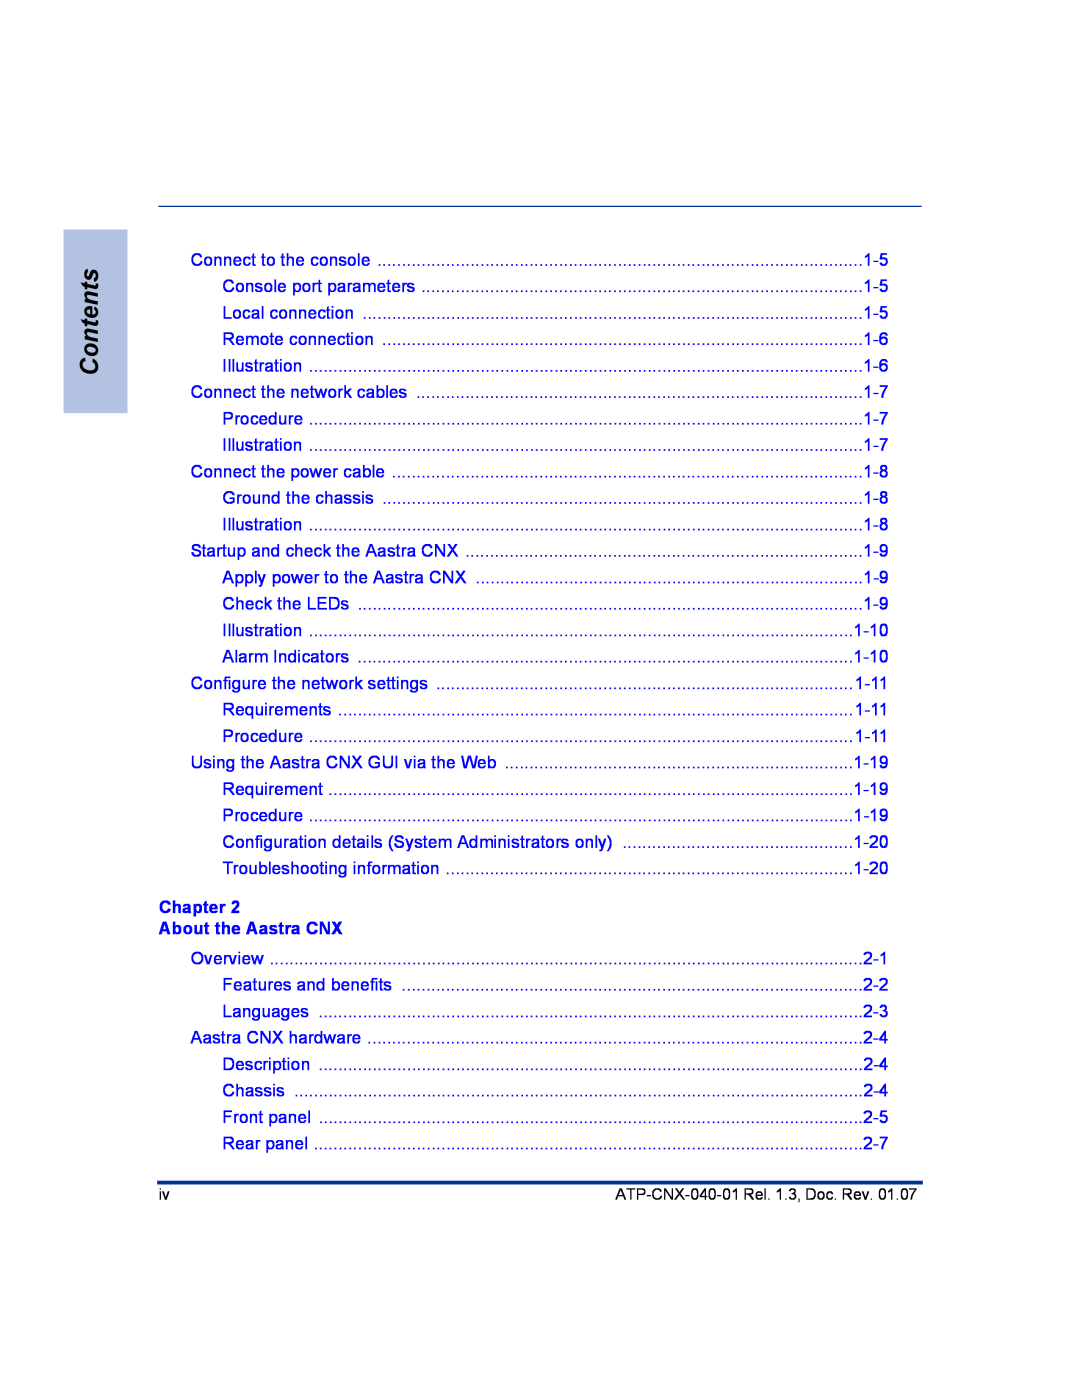 Aastra Telecom ATP-CNX-040-01 manual Contents, Chapter, About the Aastra CNX 